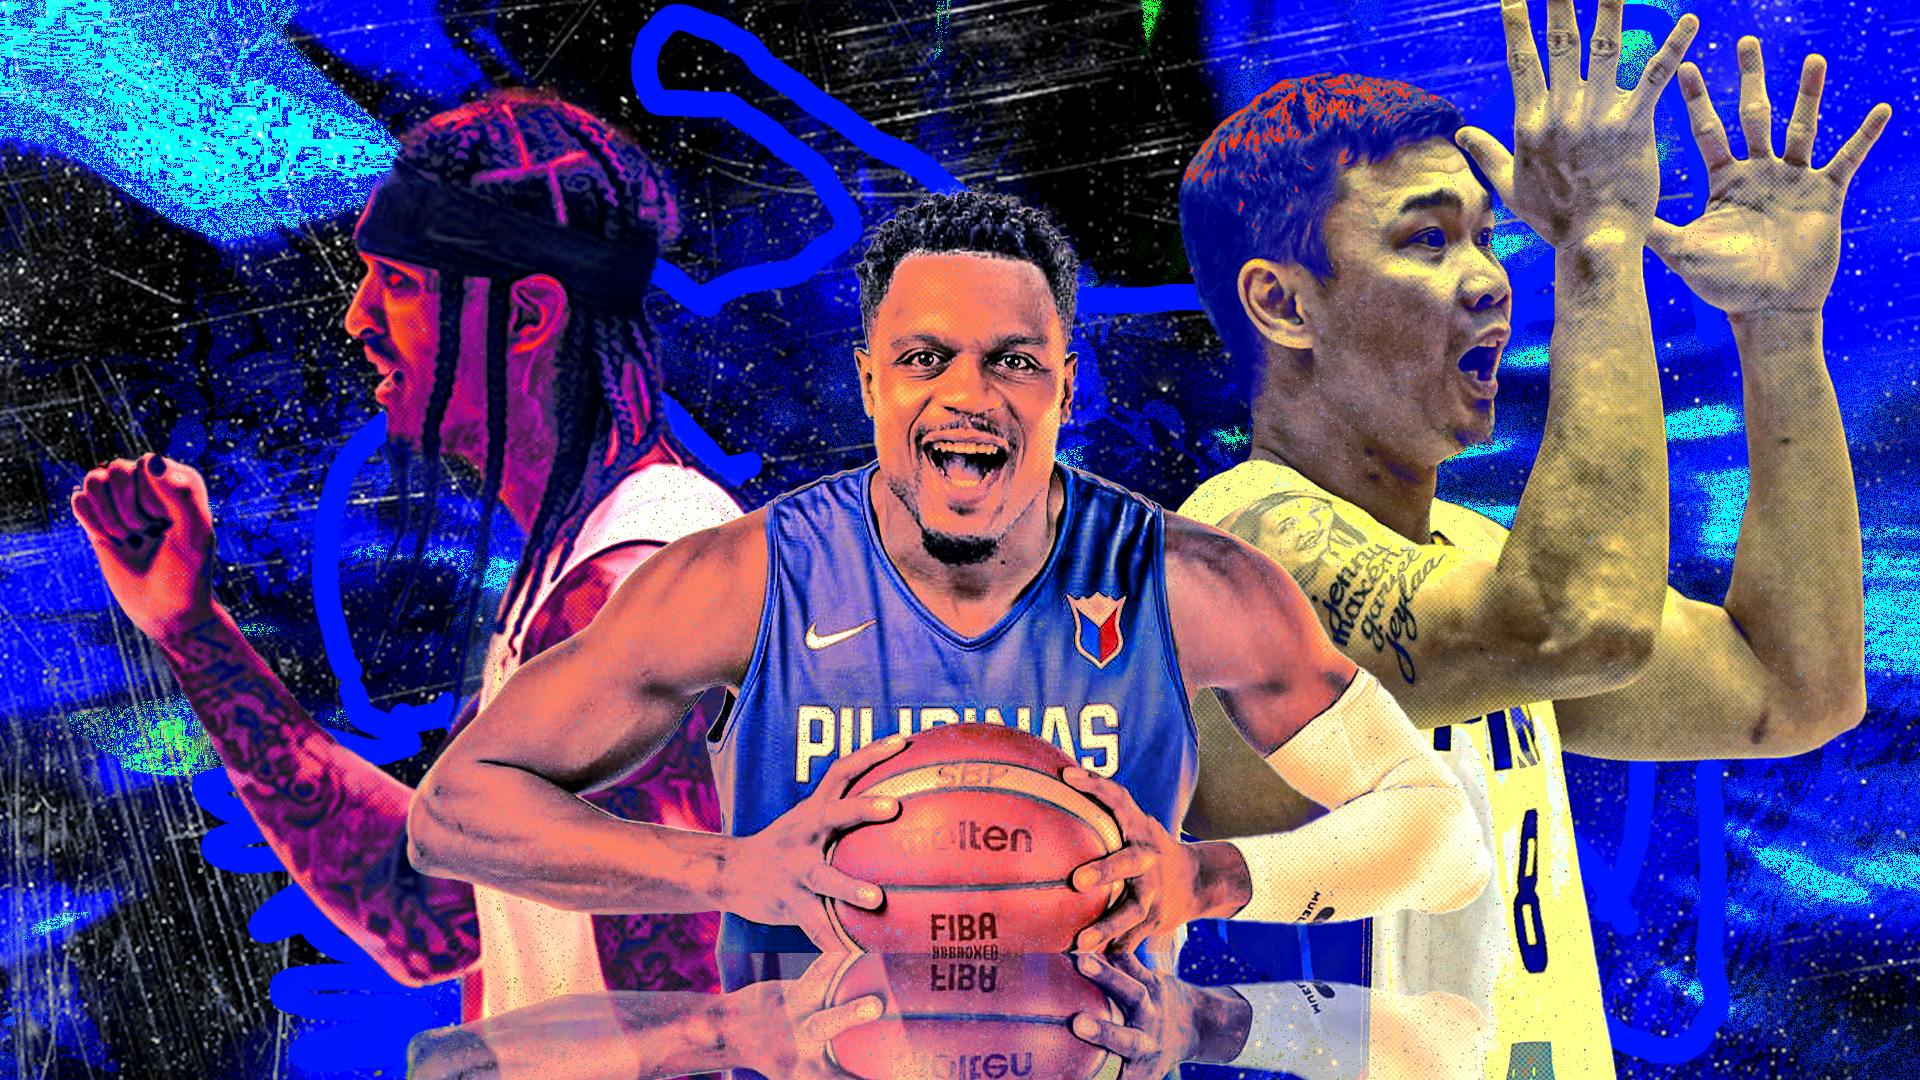 Go off: 5 memorable three-point shooting displays in Gilas Pilipinas recent history, ranked